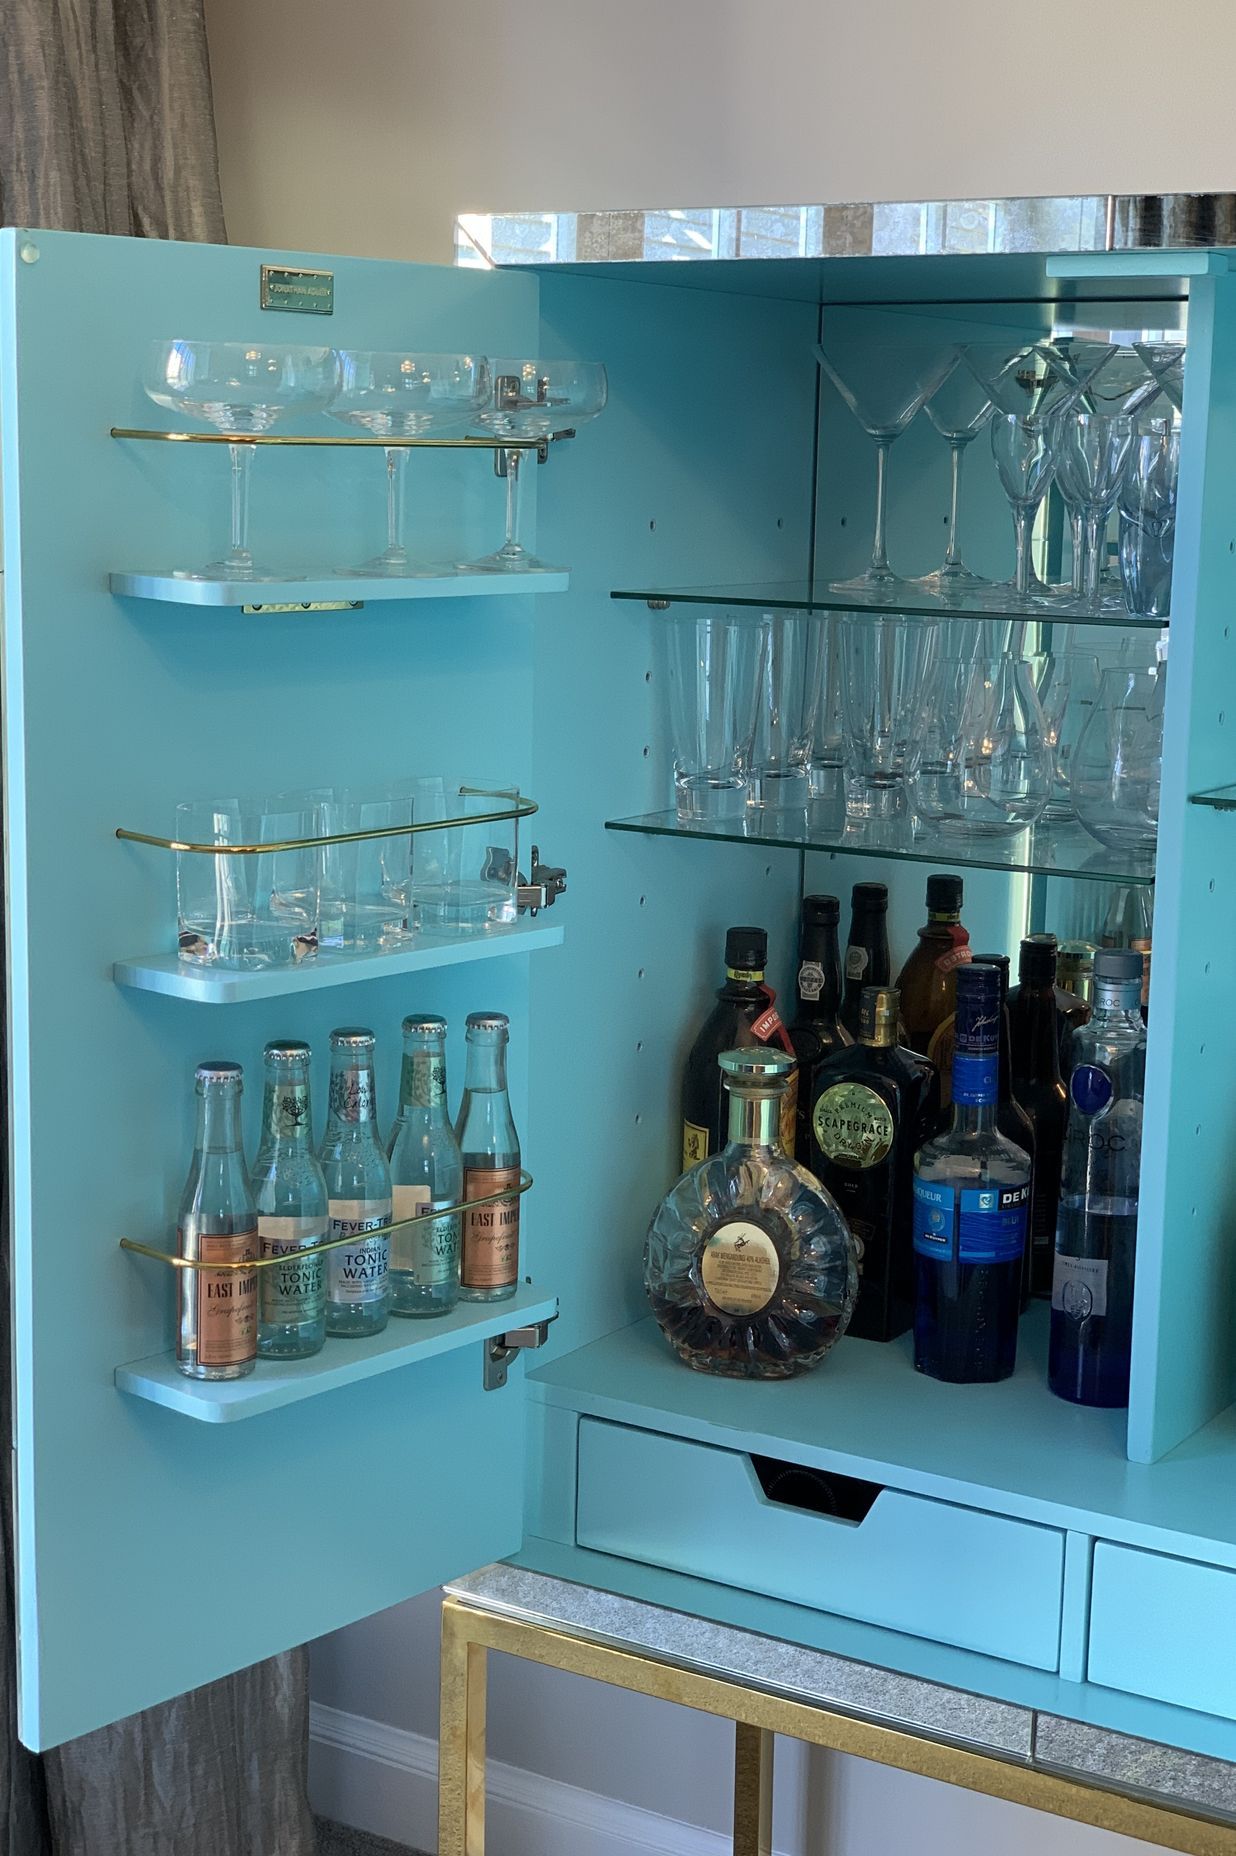 A fun burst of colour in the drinks cabinet